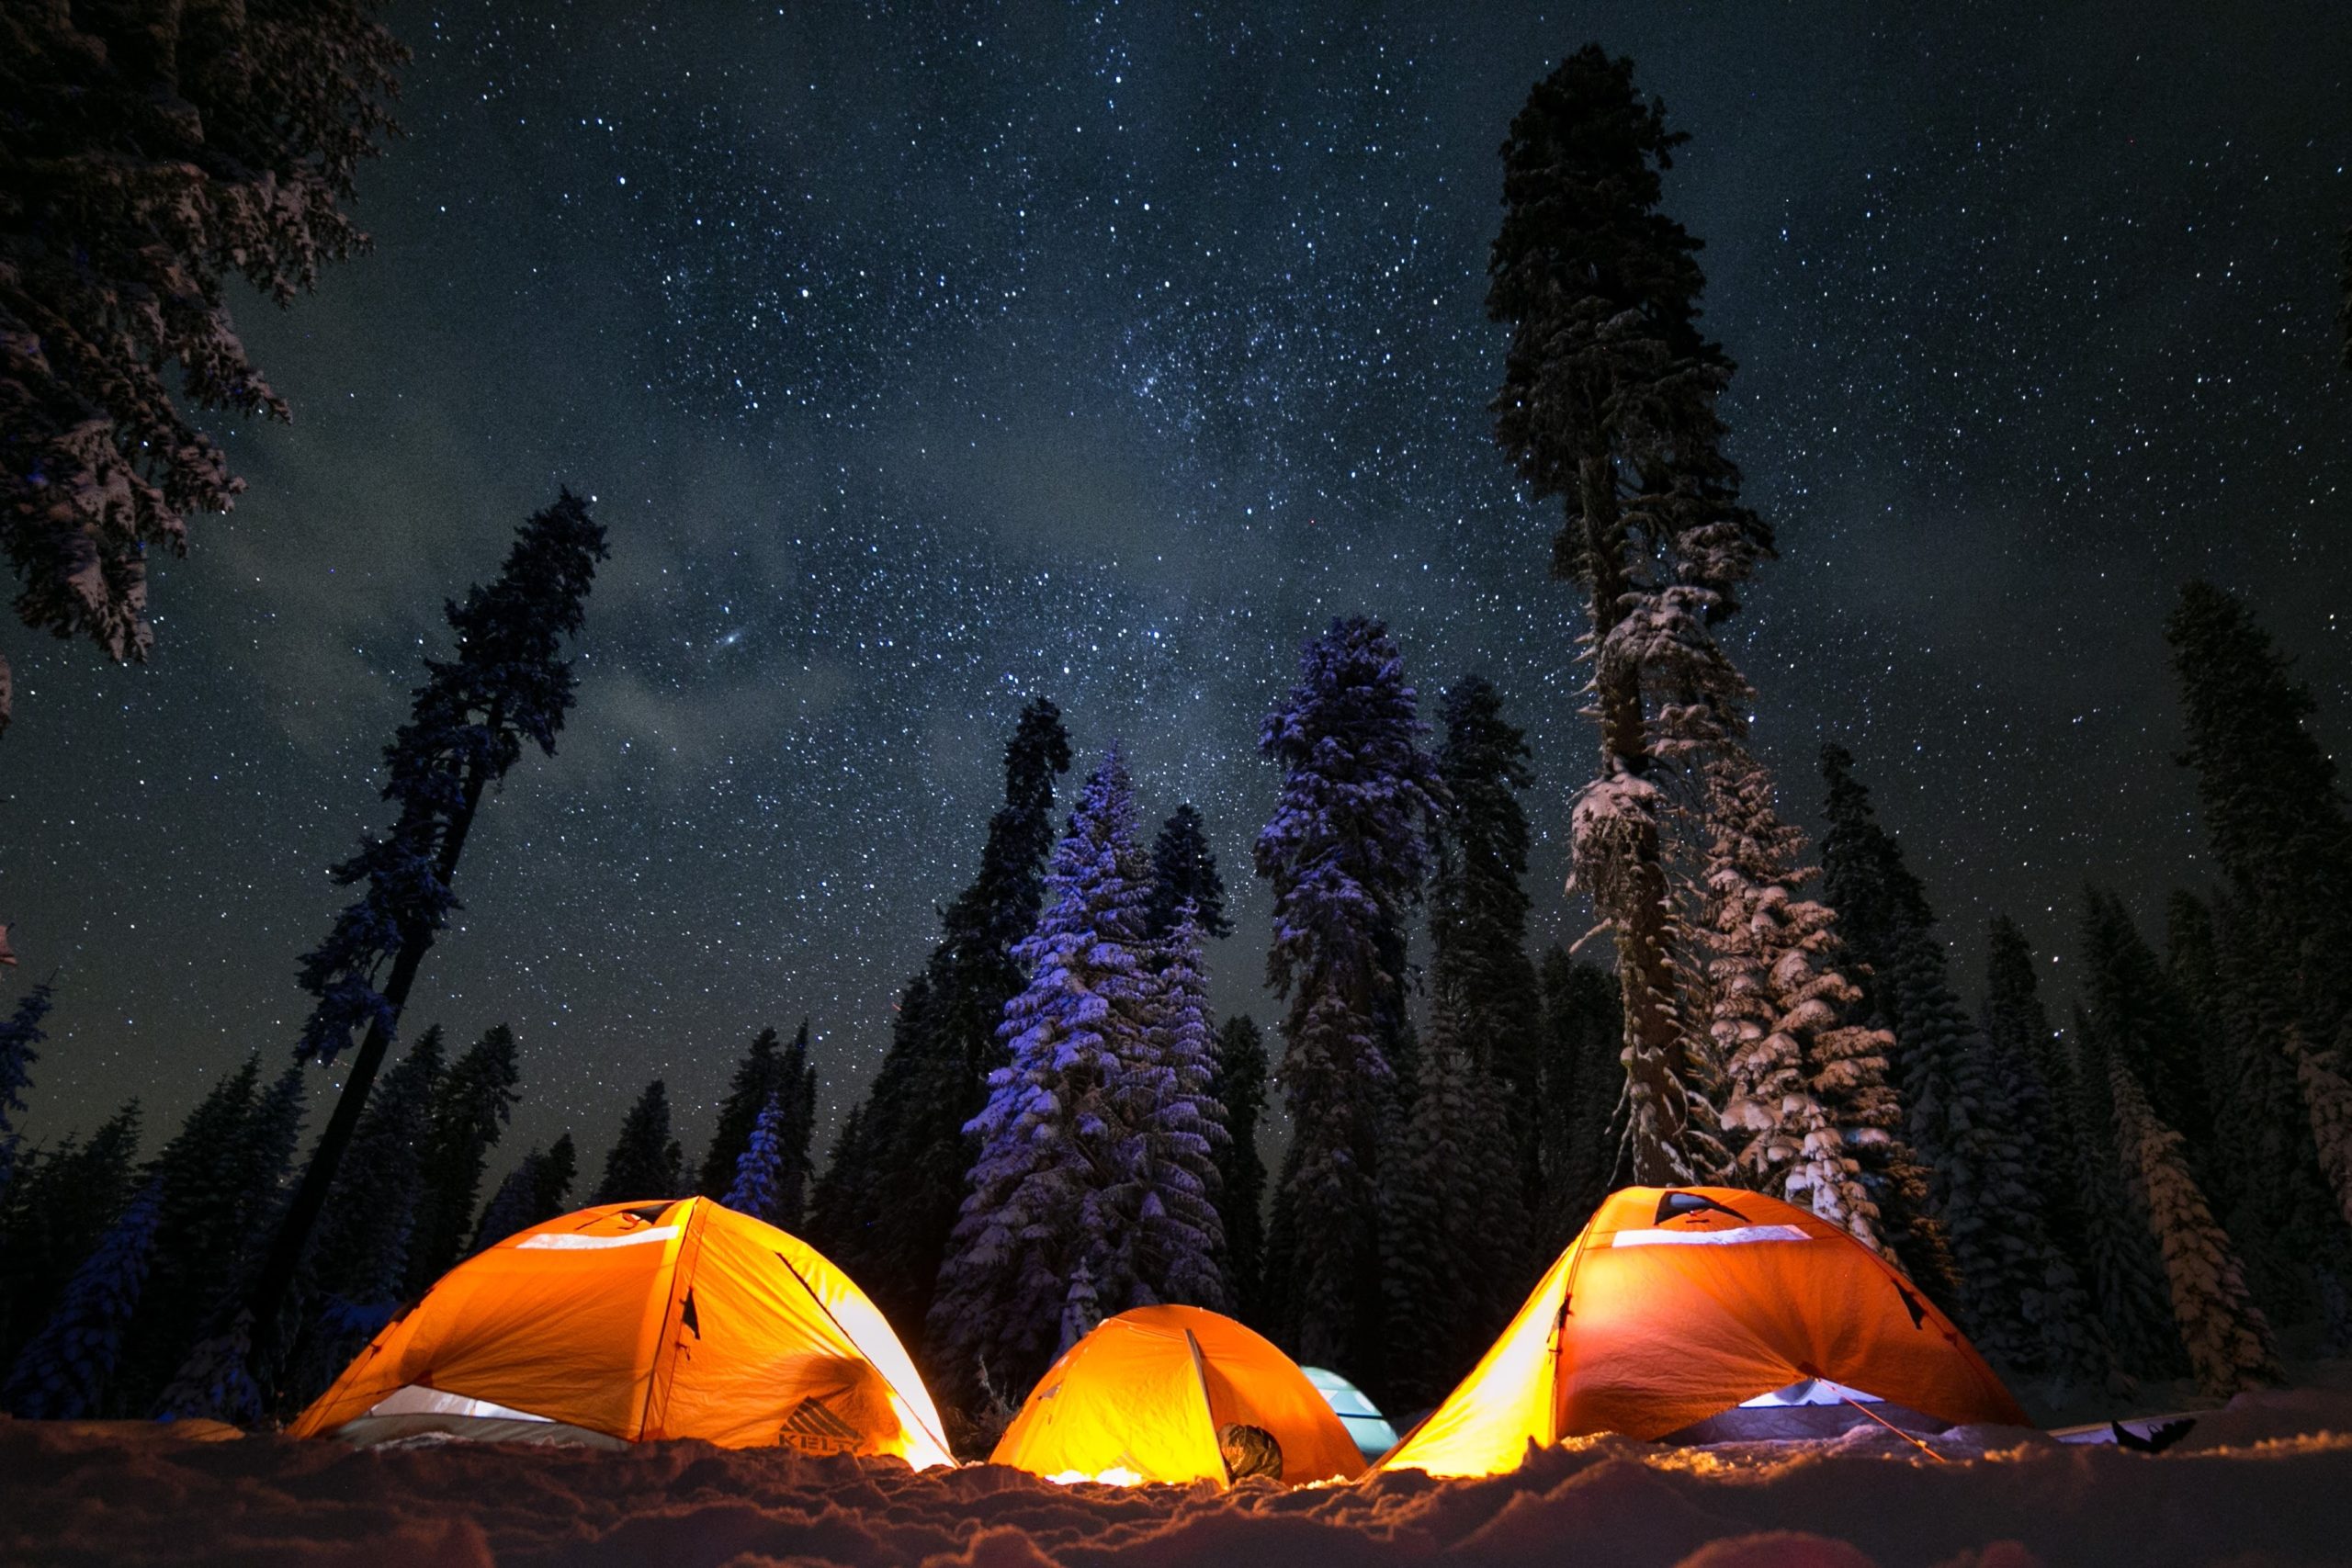 Three tents sit in the snow, surrounded by snow-covered trees and a sky full of stars overhead.